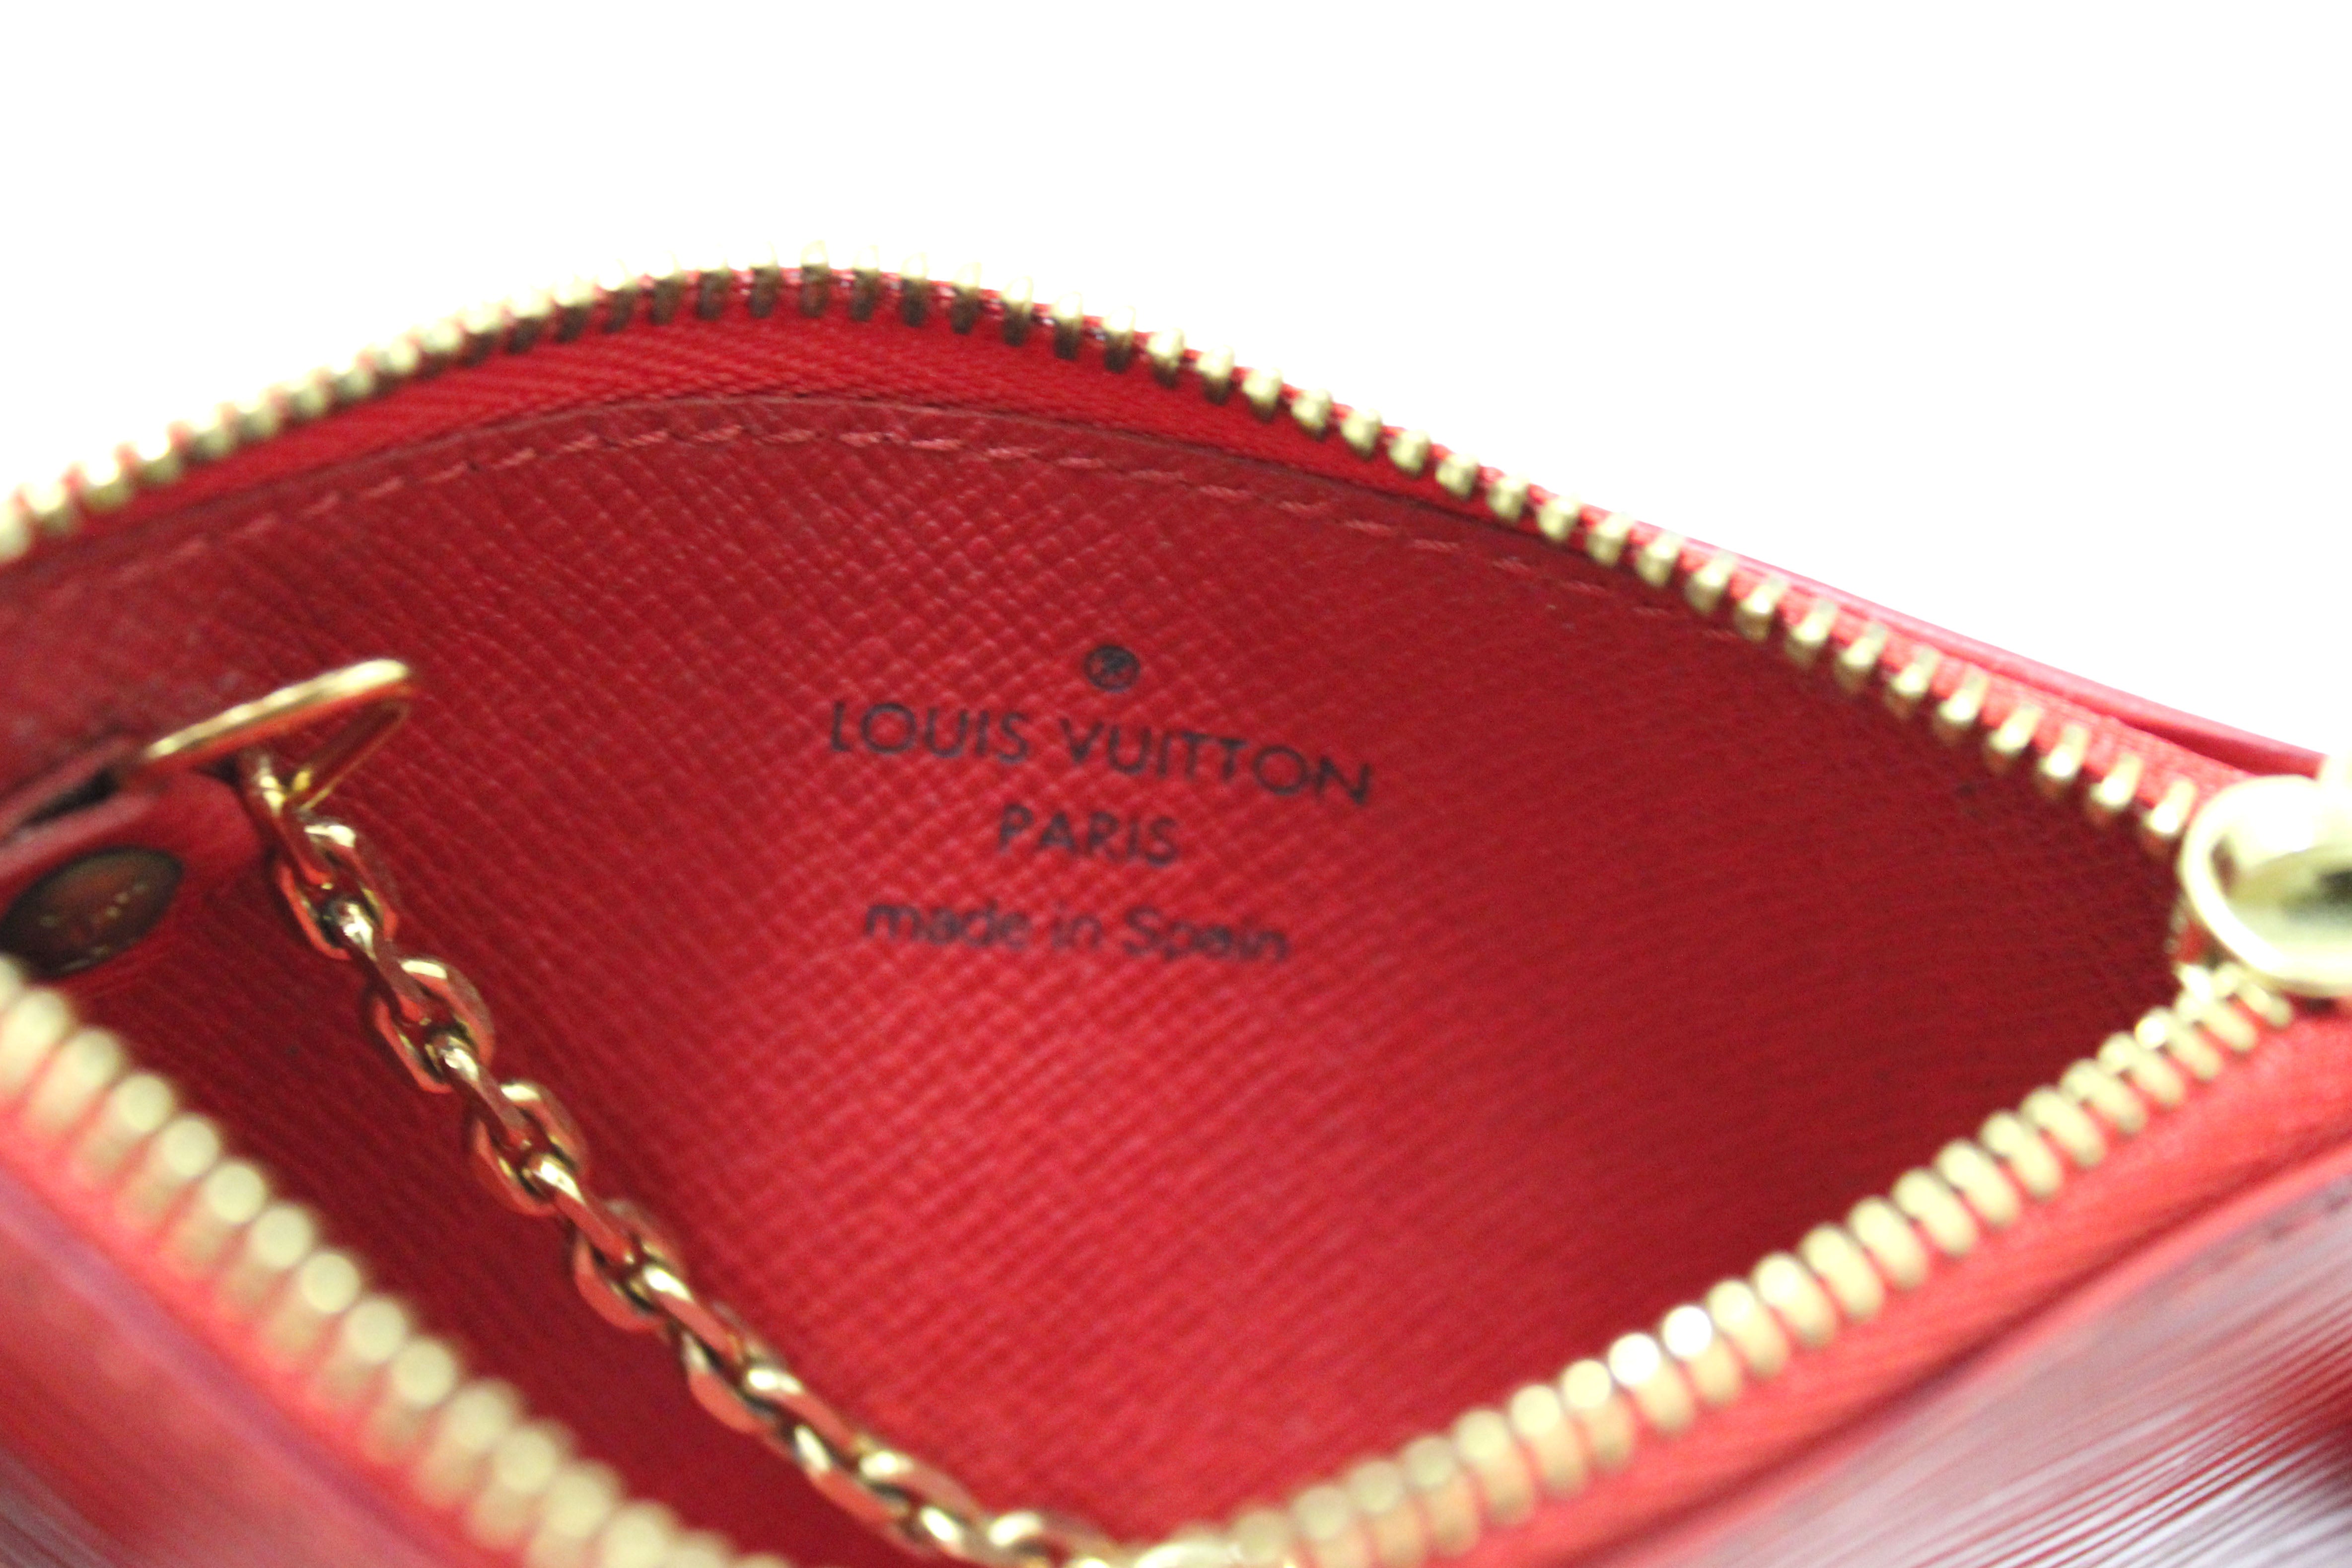 Authentic Louis Vuitton Red Epi Leather Key Coin Card Case Pouch